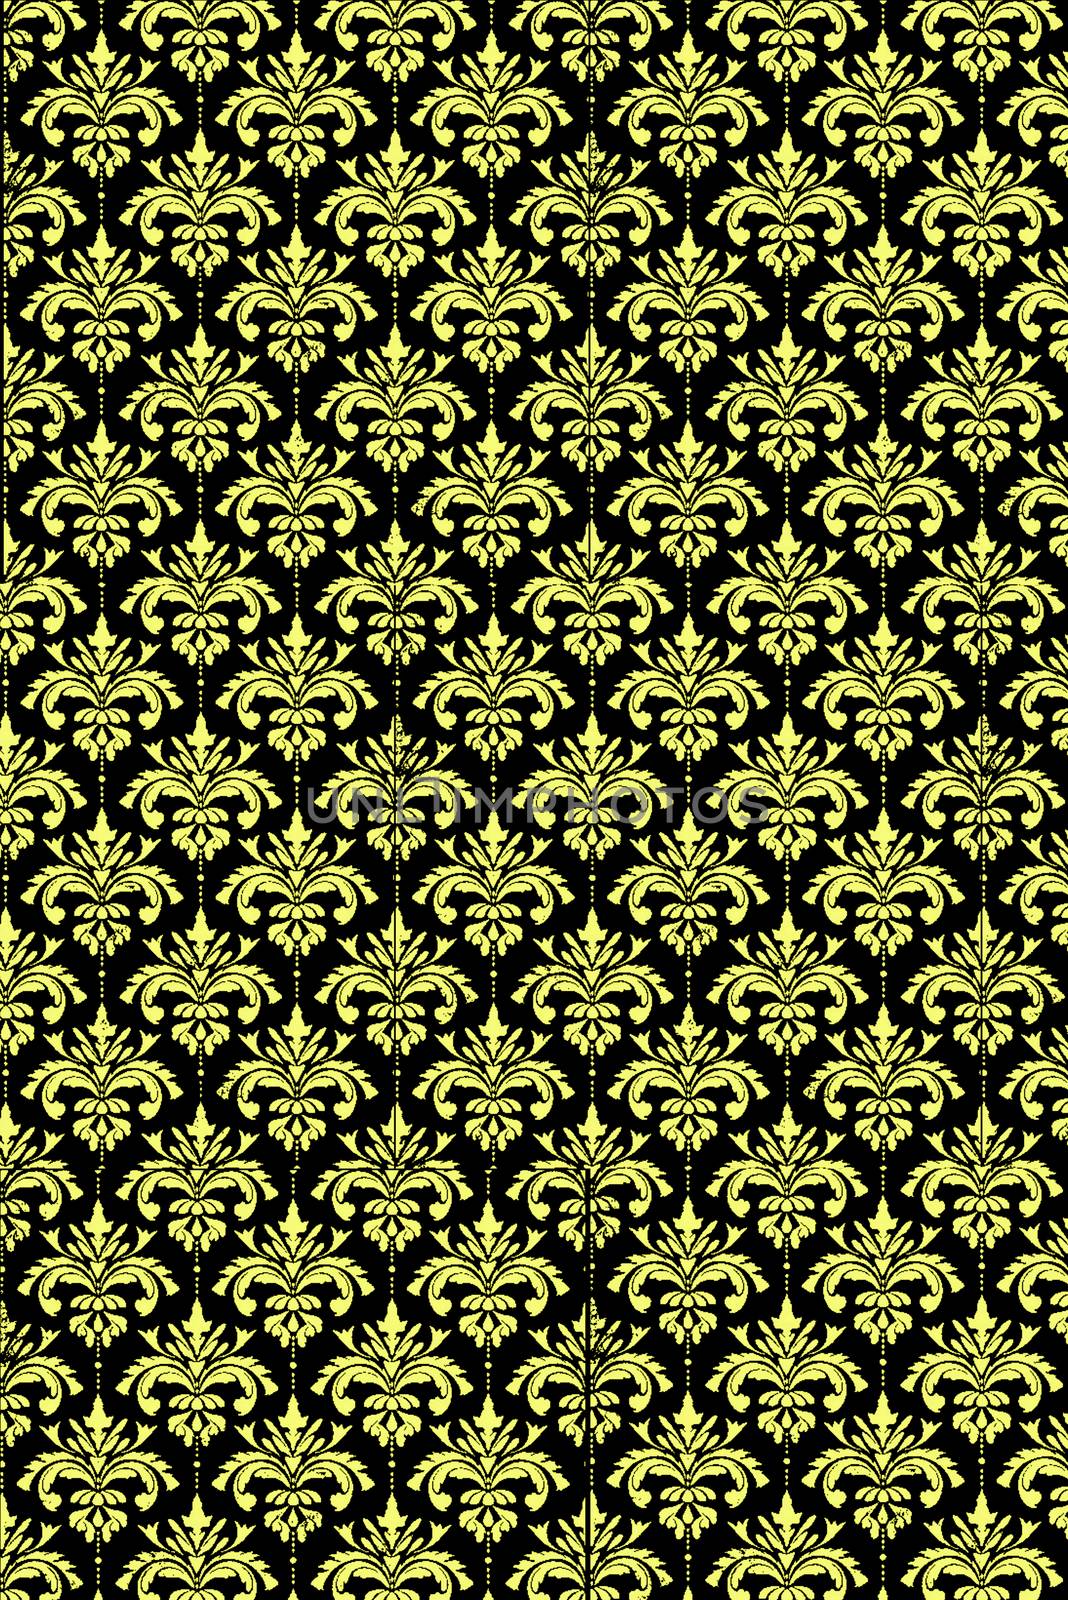 Vintage floral seamless patten. Classic Baroque wallpaper.  Black and yellow